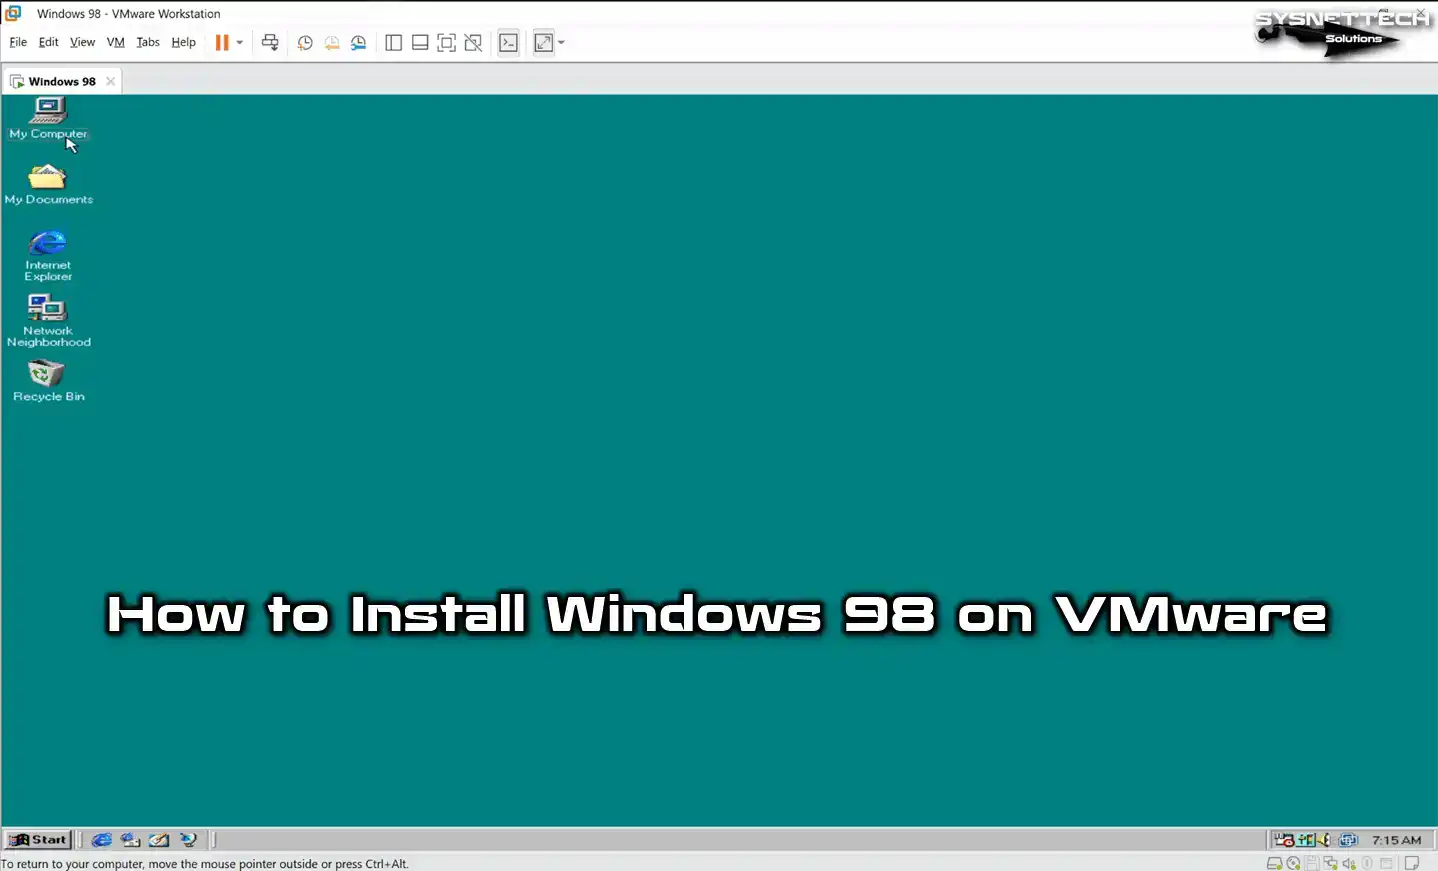 how to download windows 98 on vmware workstation 15